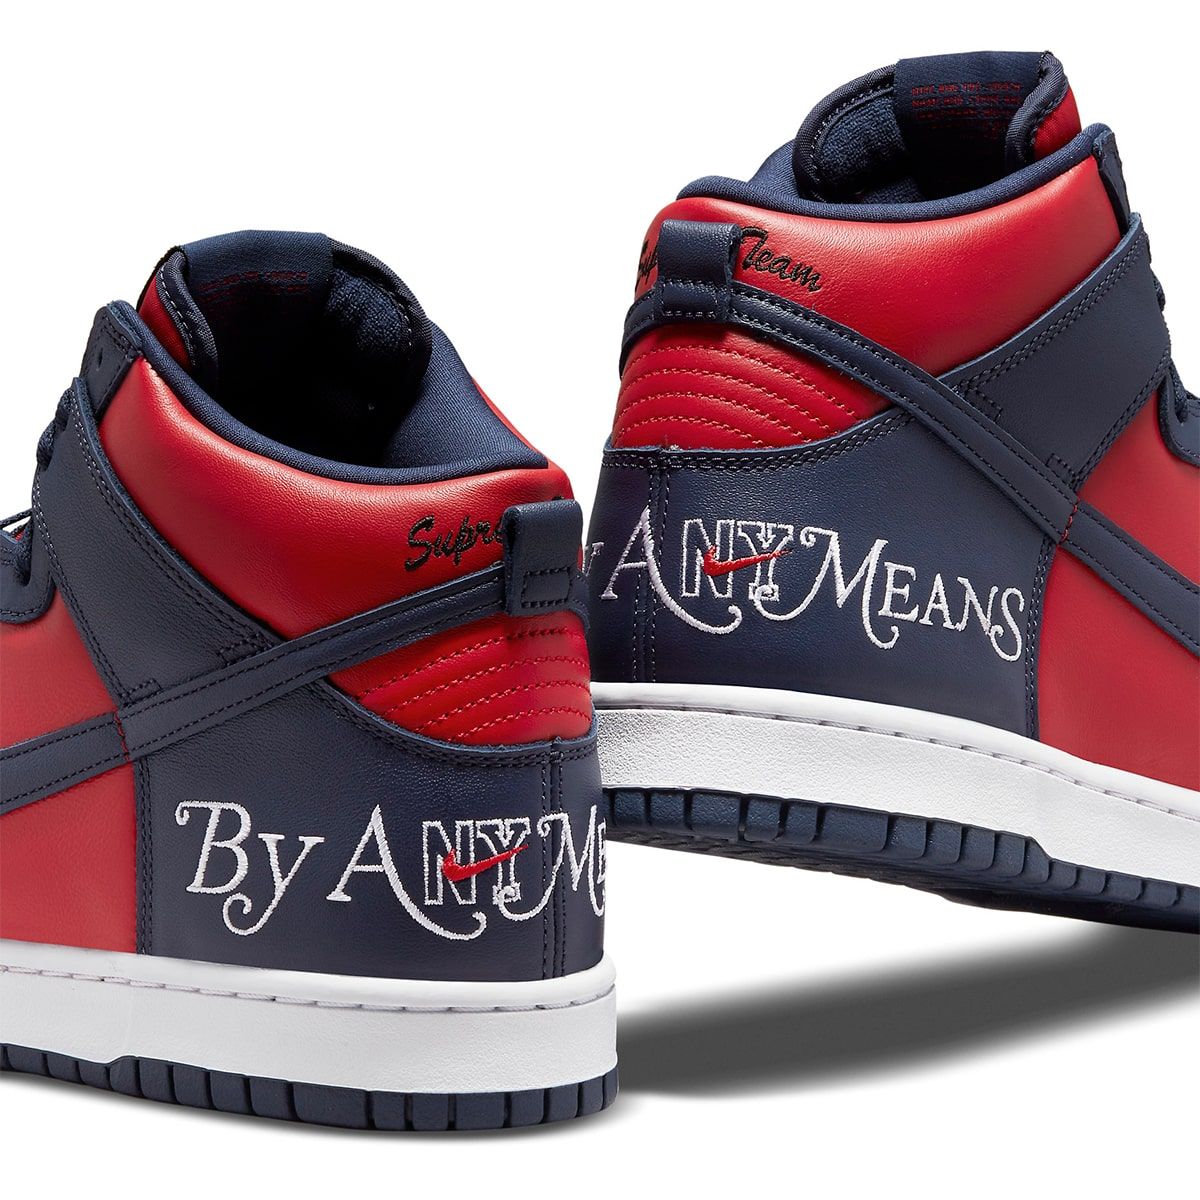 Supreme x Nike SB Dunk High “By Any Means” Collection Releases